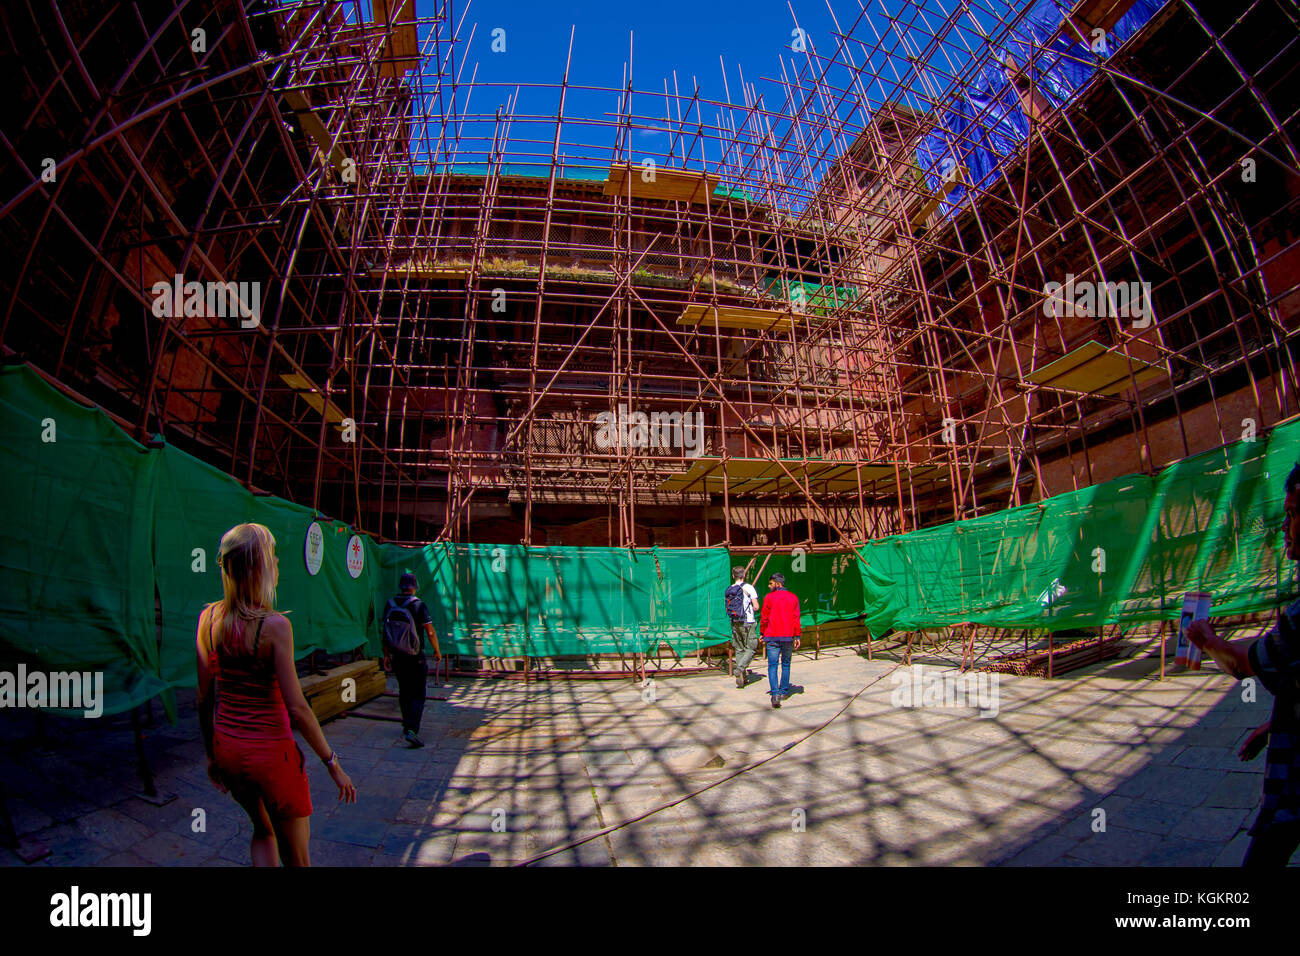 KATHMANDU, NEPAL OCTOBER 15, 2017: Unidentified people walking close to some buildings in reconstruction after the earthquake in 2015 of Durbar square in Kathmandu, capital of Nepal, fish eye effect Stock Photo